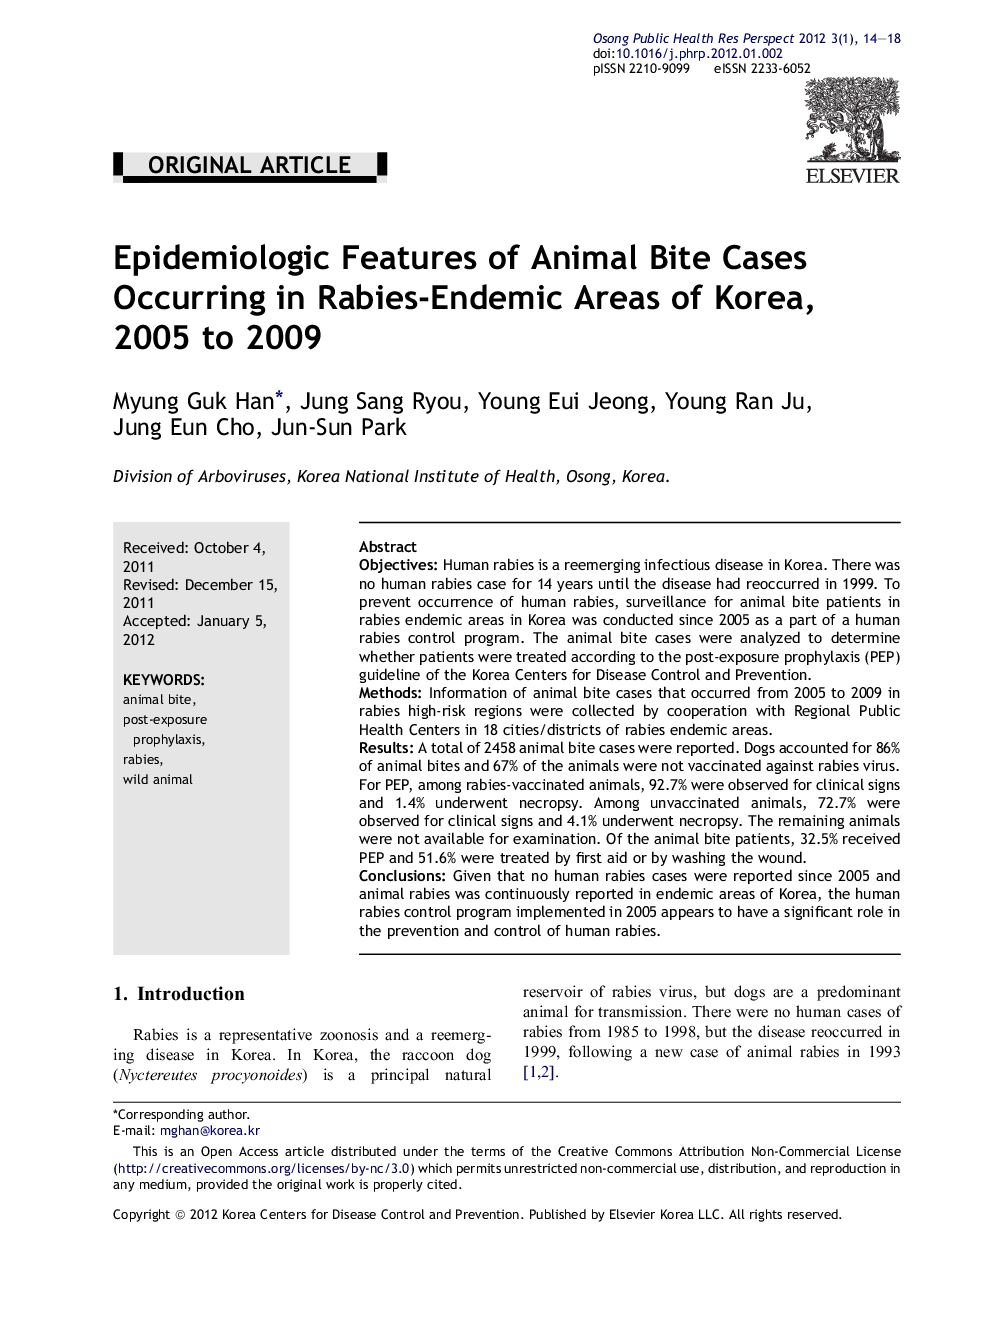 Epidemiologic Features of Animal Bite Cases Occurring in Rabies-Endemic Areas of Korea, 2005 to 2009 